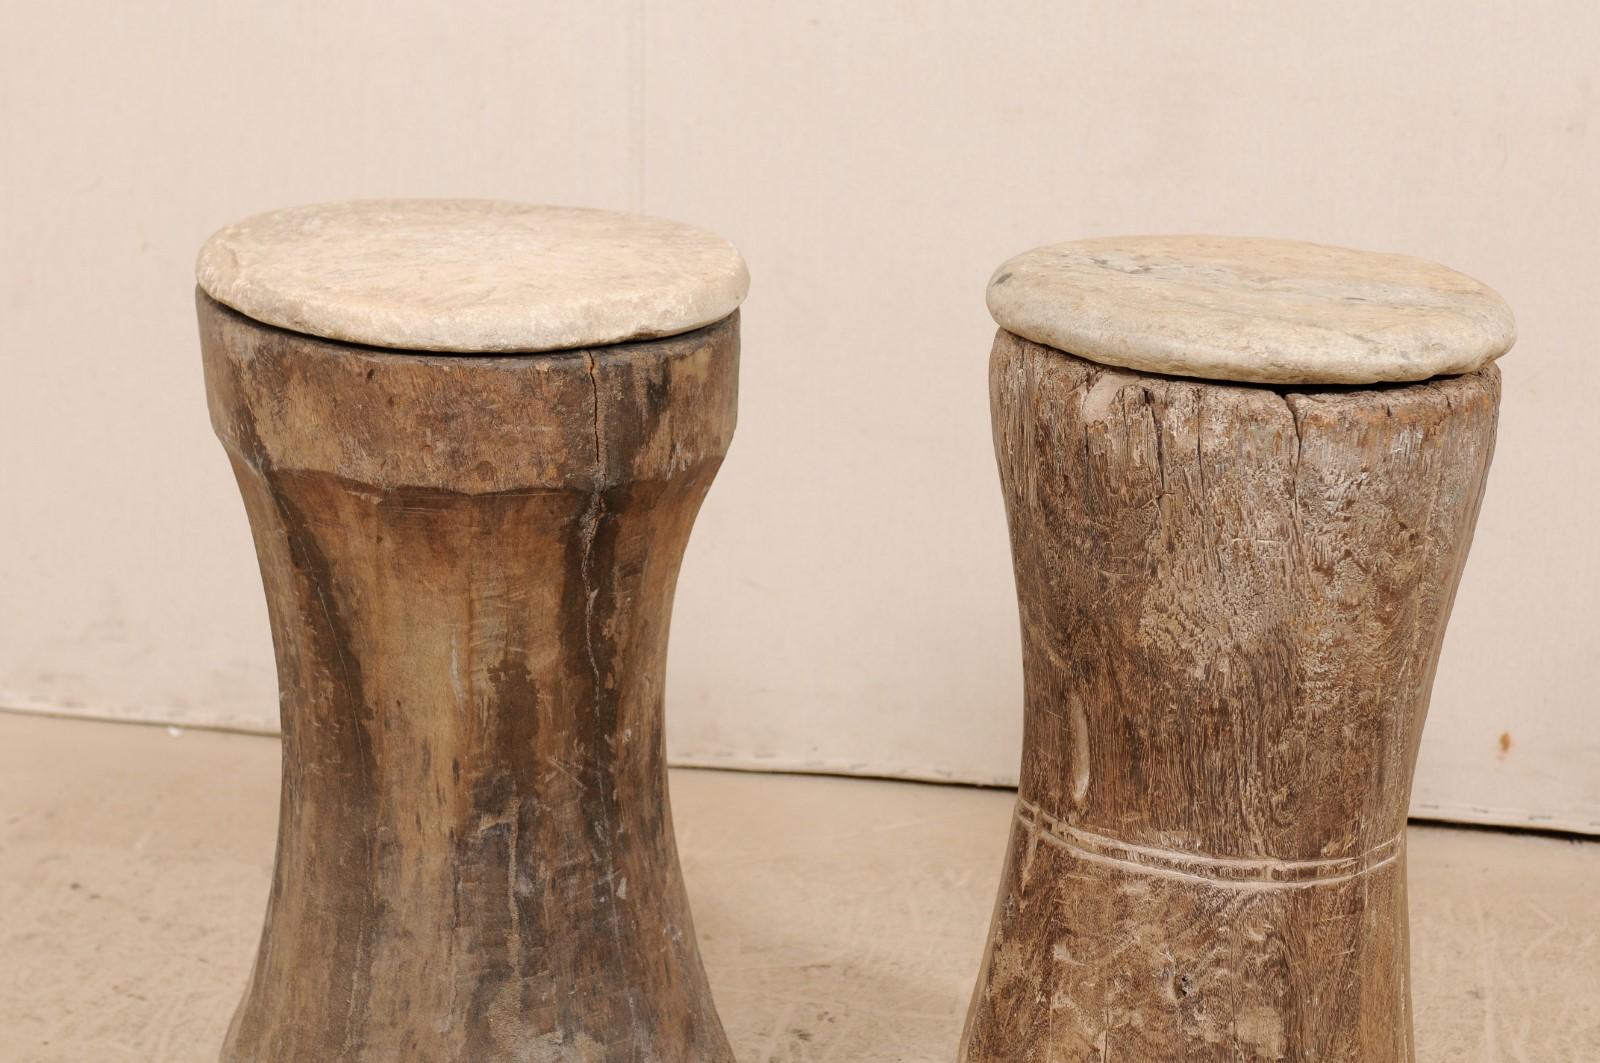 Pair of 19th Century Rustic Wood Mortar Side Tables with Antique Stone Tops 4